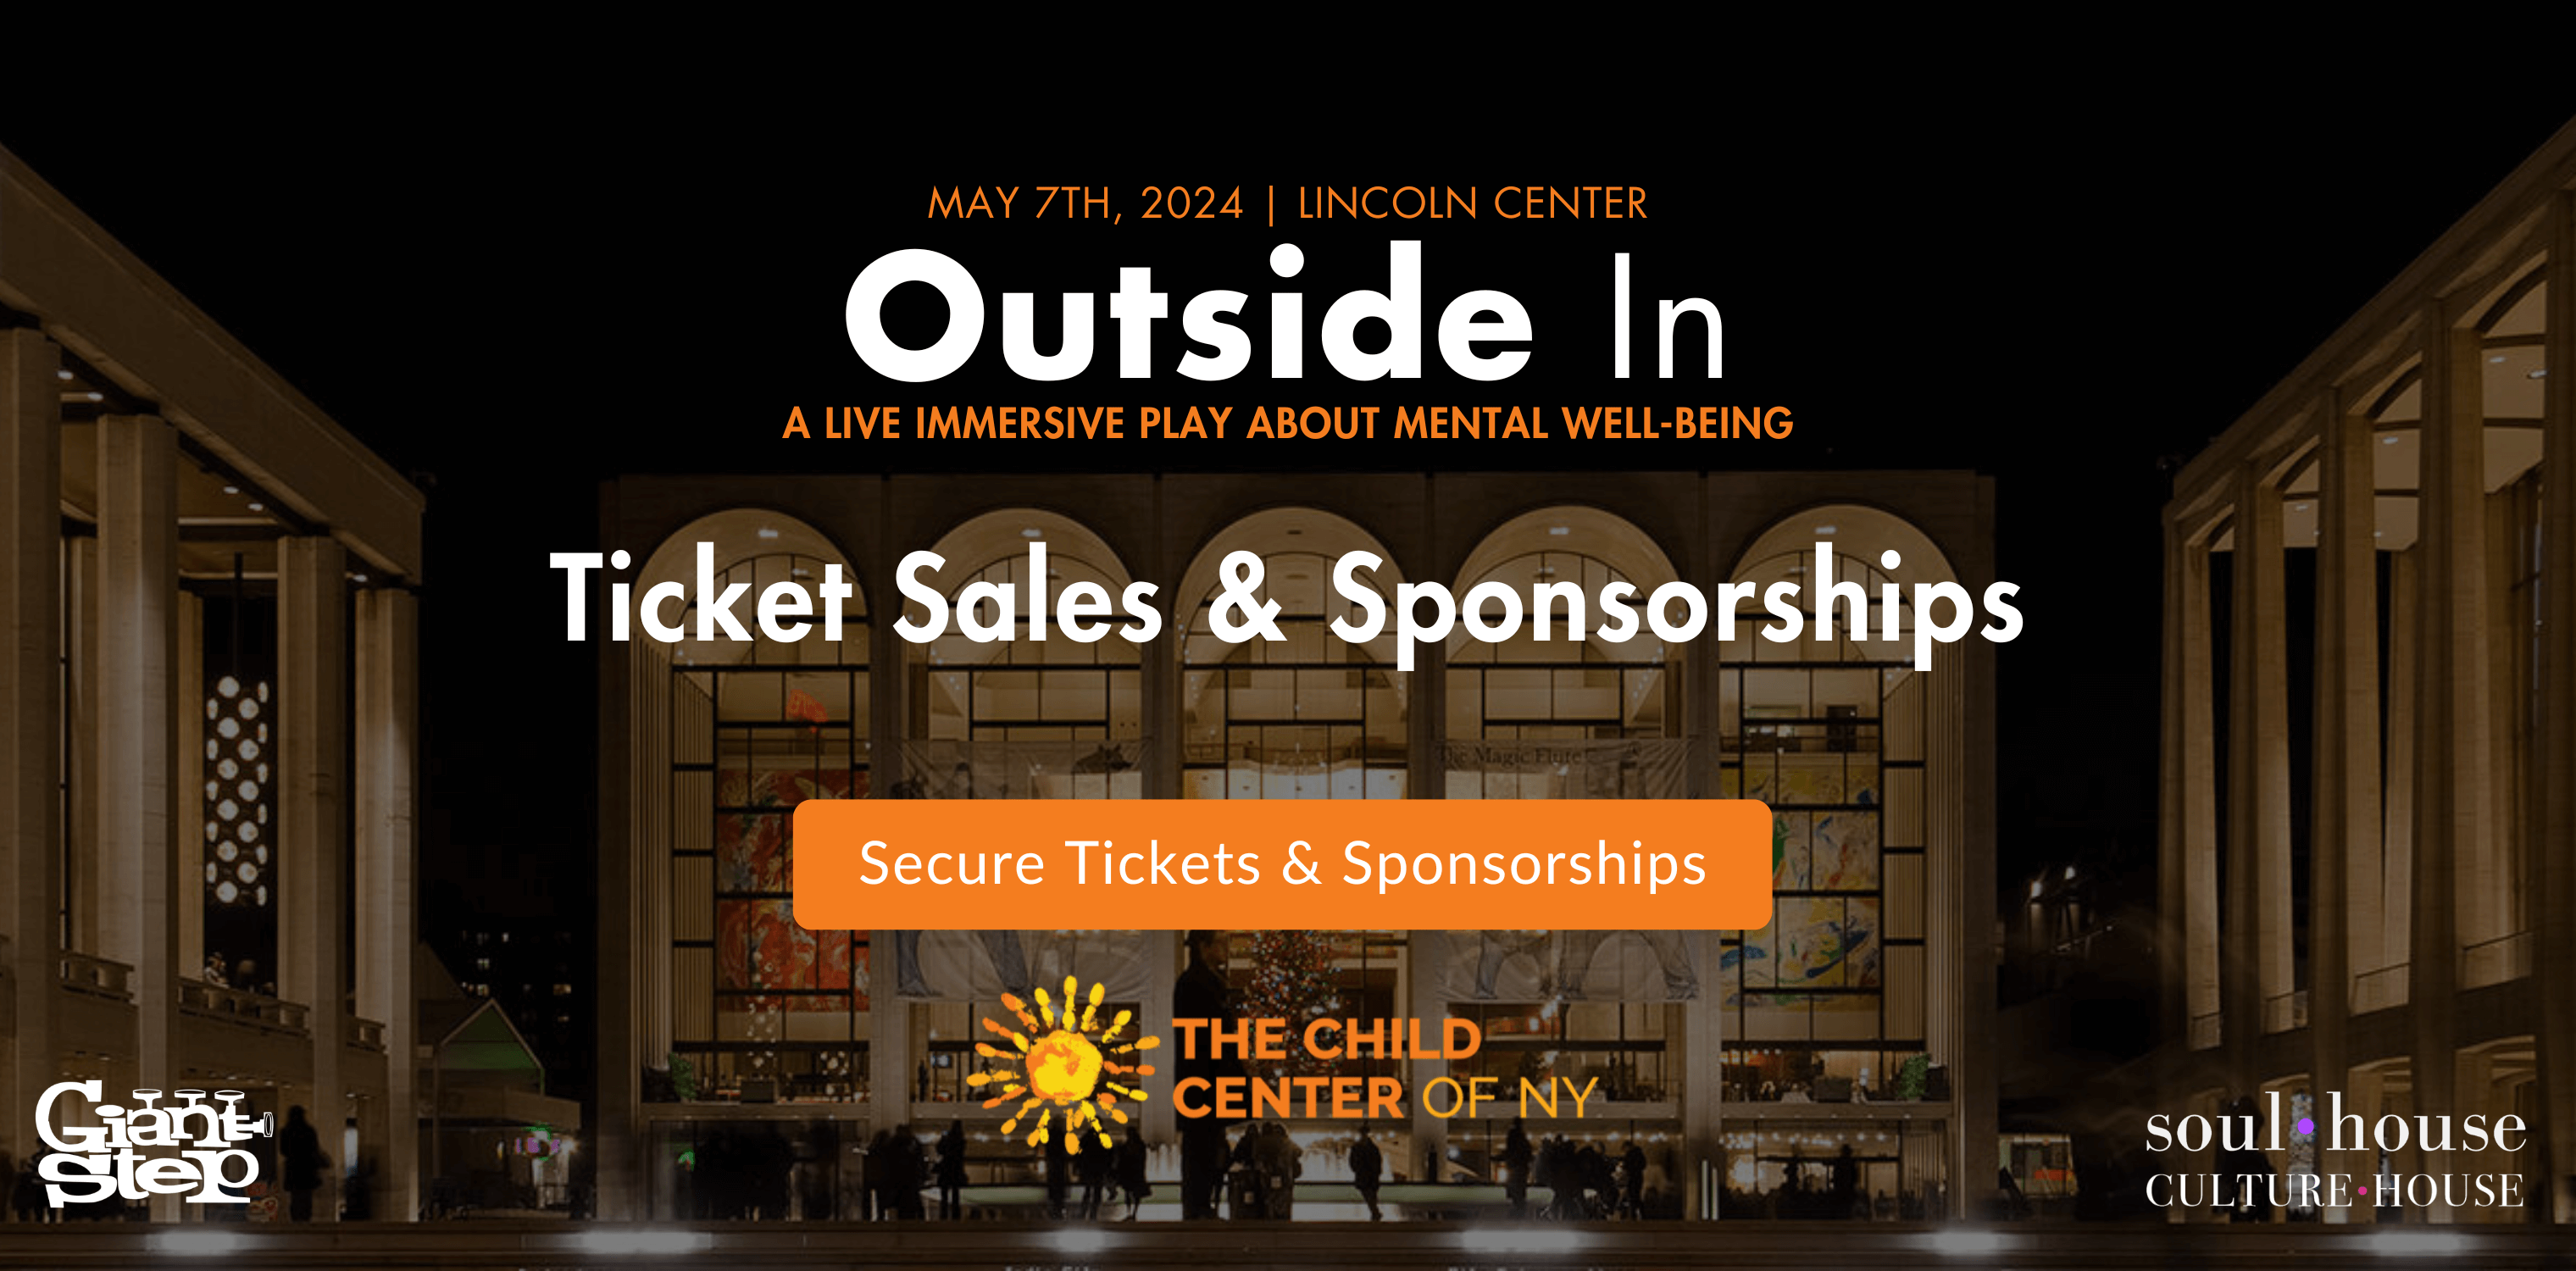 Secure tickets and sponsorships